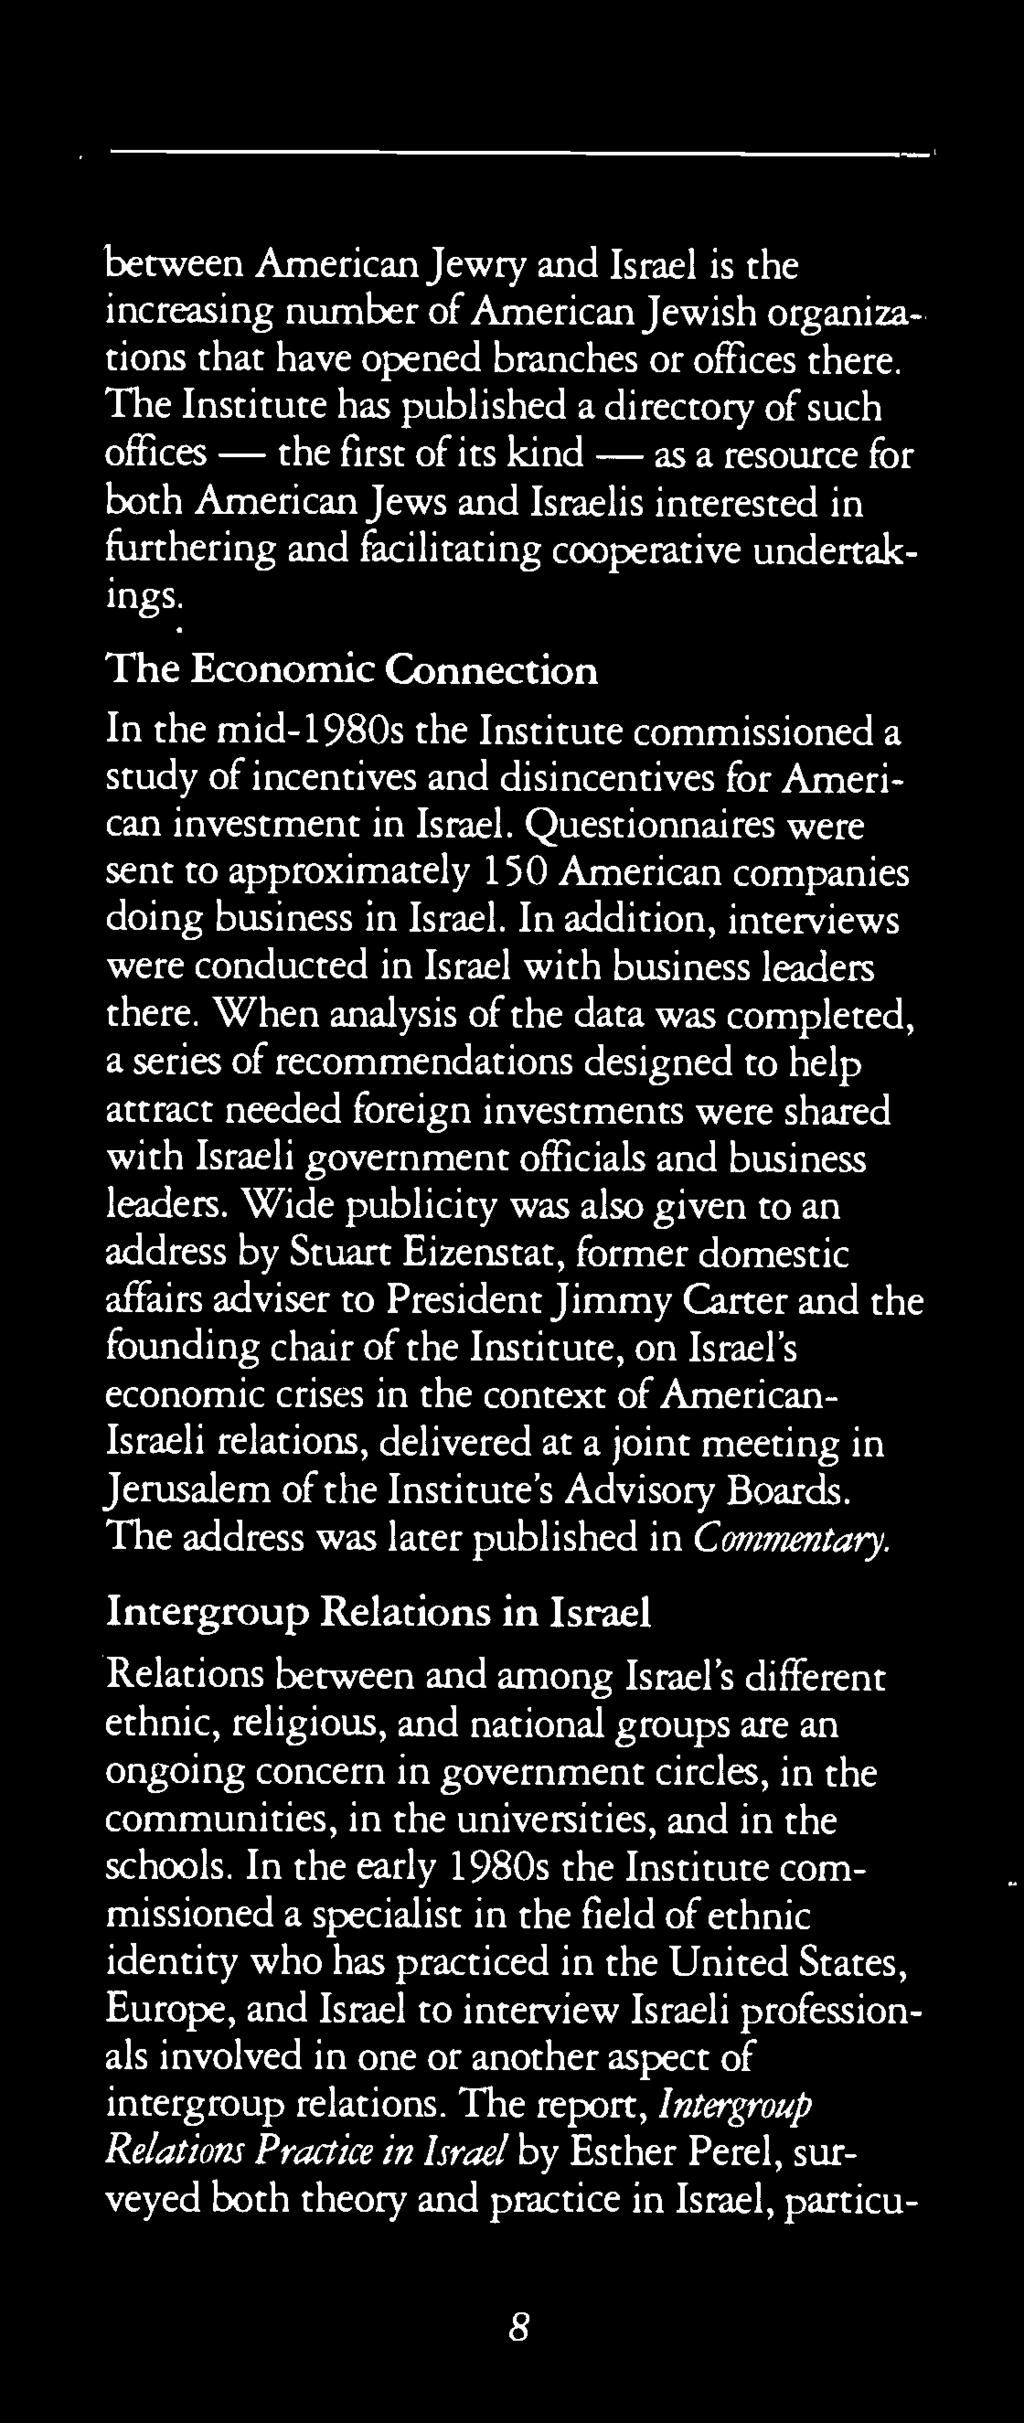 The Economic Connection In the mid-1980s the Institute commissioned a study of incentives and disincentives for American investment in Israel.